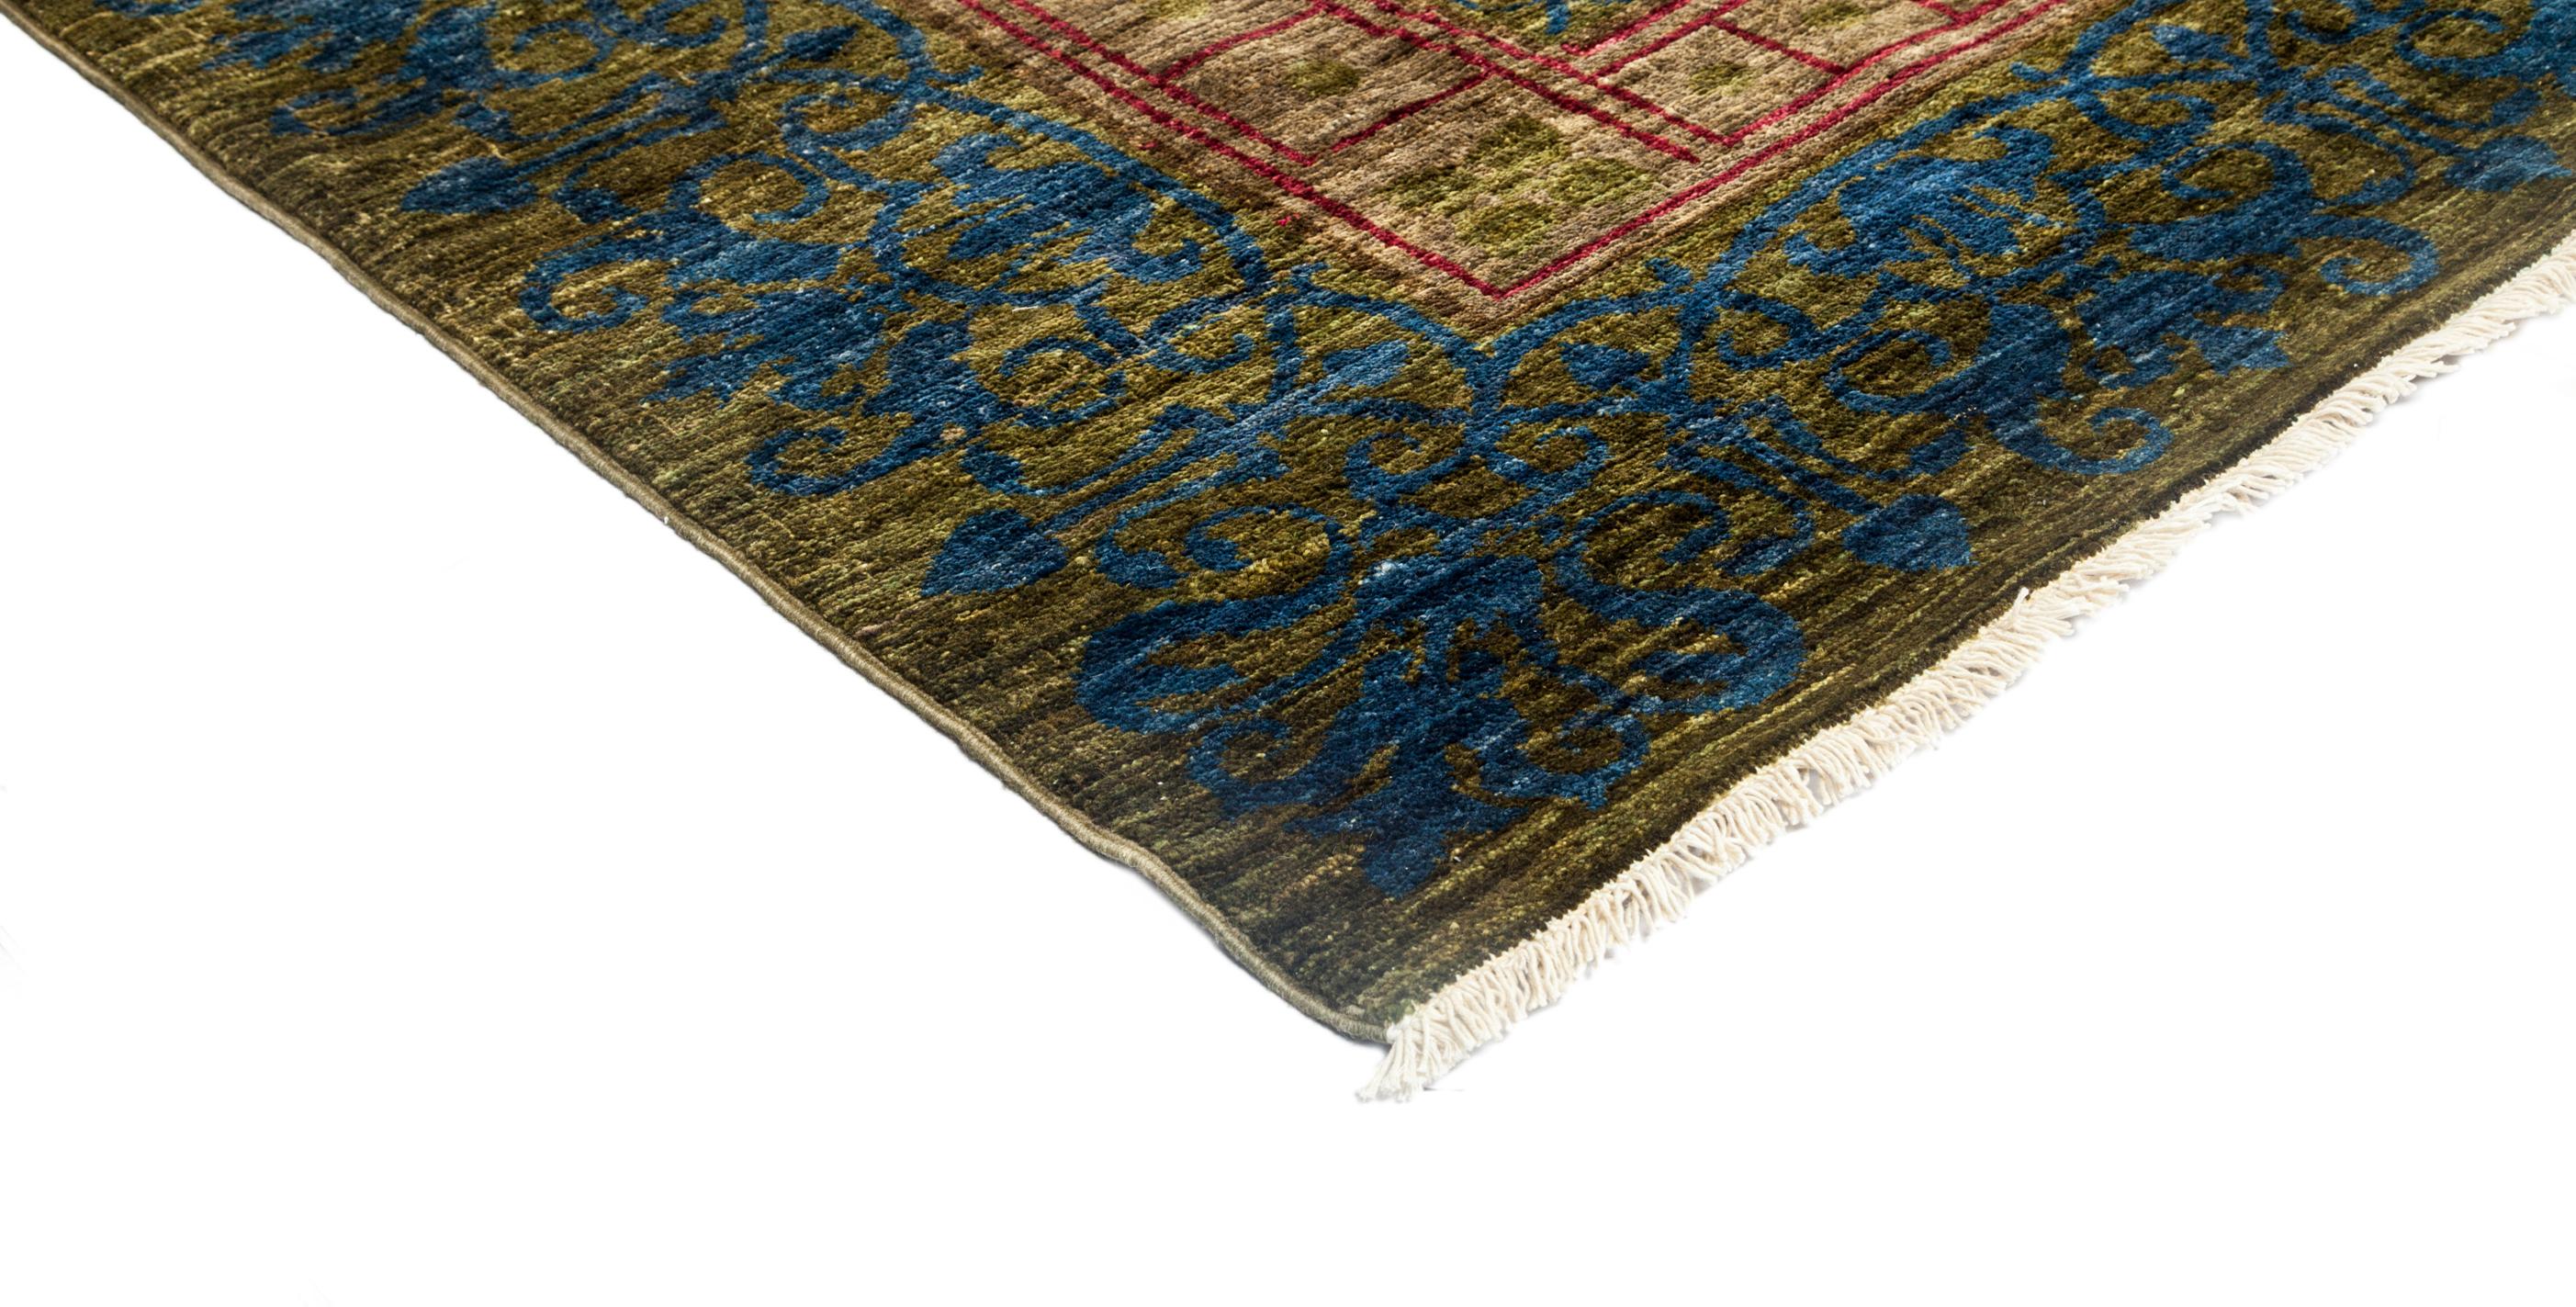 This is one of our most popular area rug collections. Based on the concept of embroidered textiles from Uzbekistan, we find the floral Suzani. It has endlessly found itself in the form of drapes, couches, pillows, but most importantly, rugs. Like